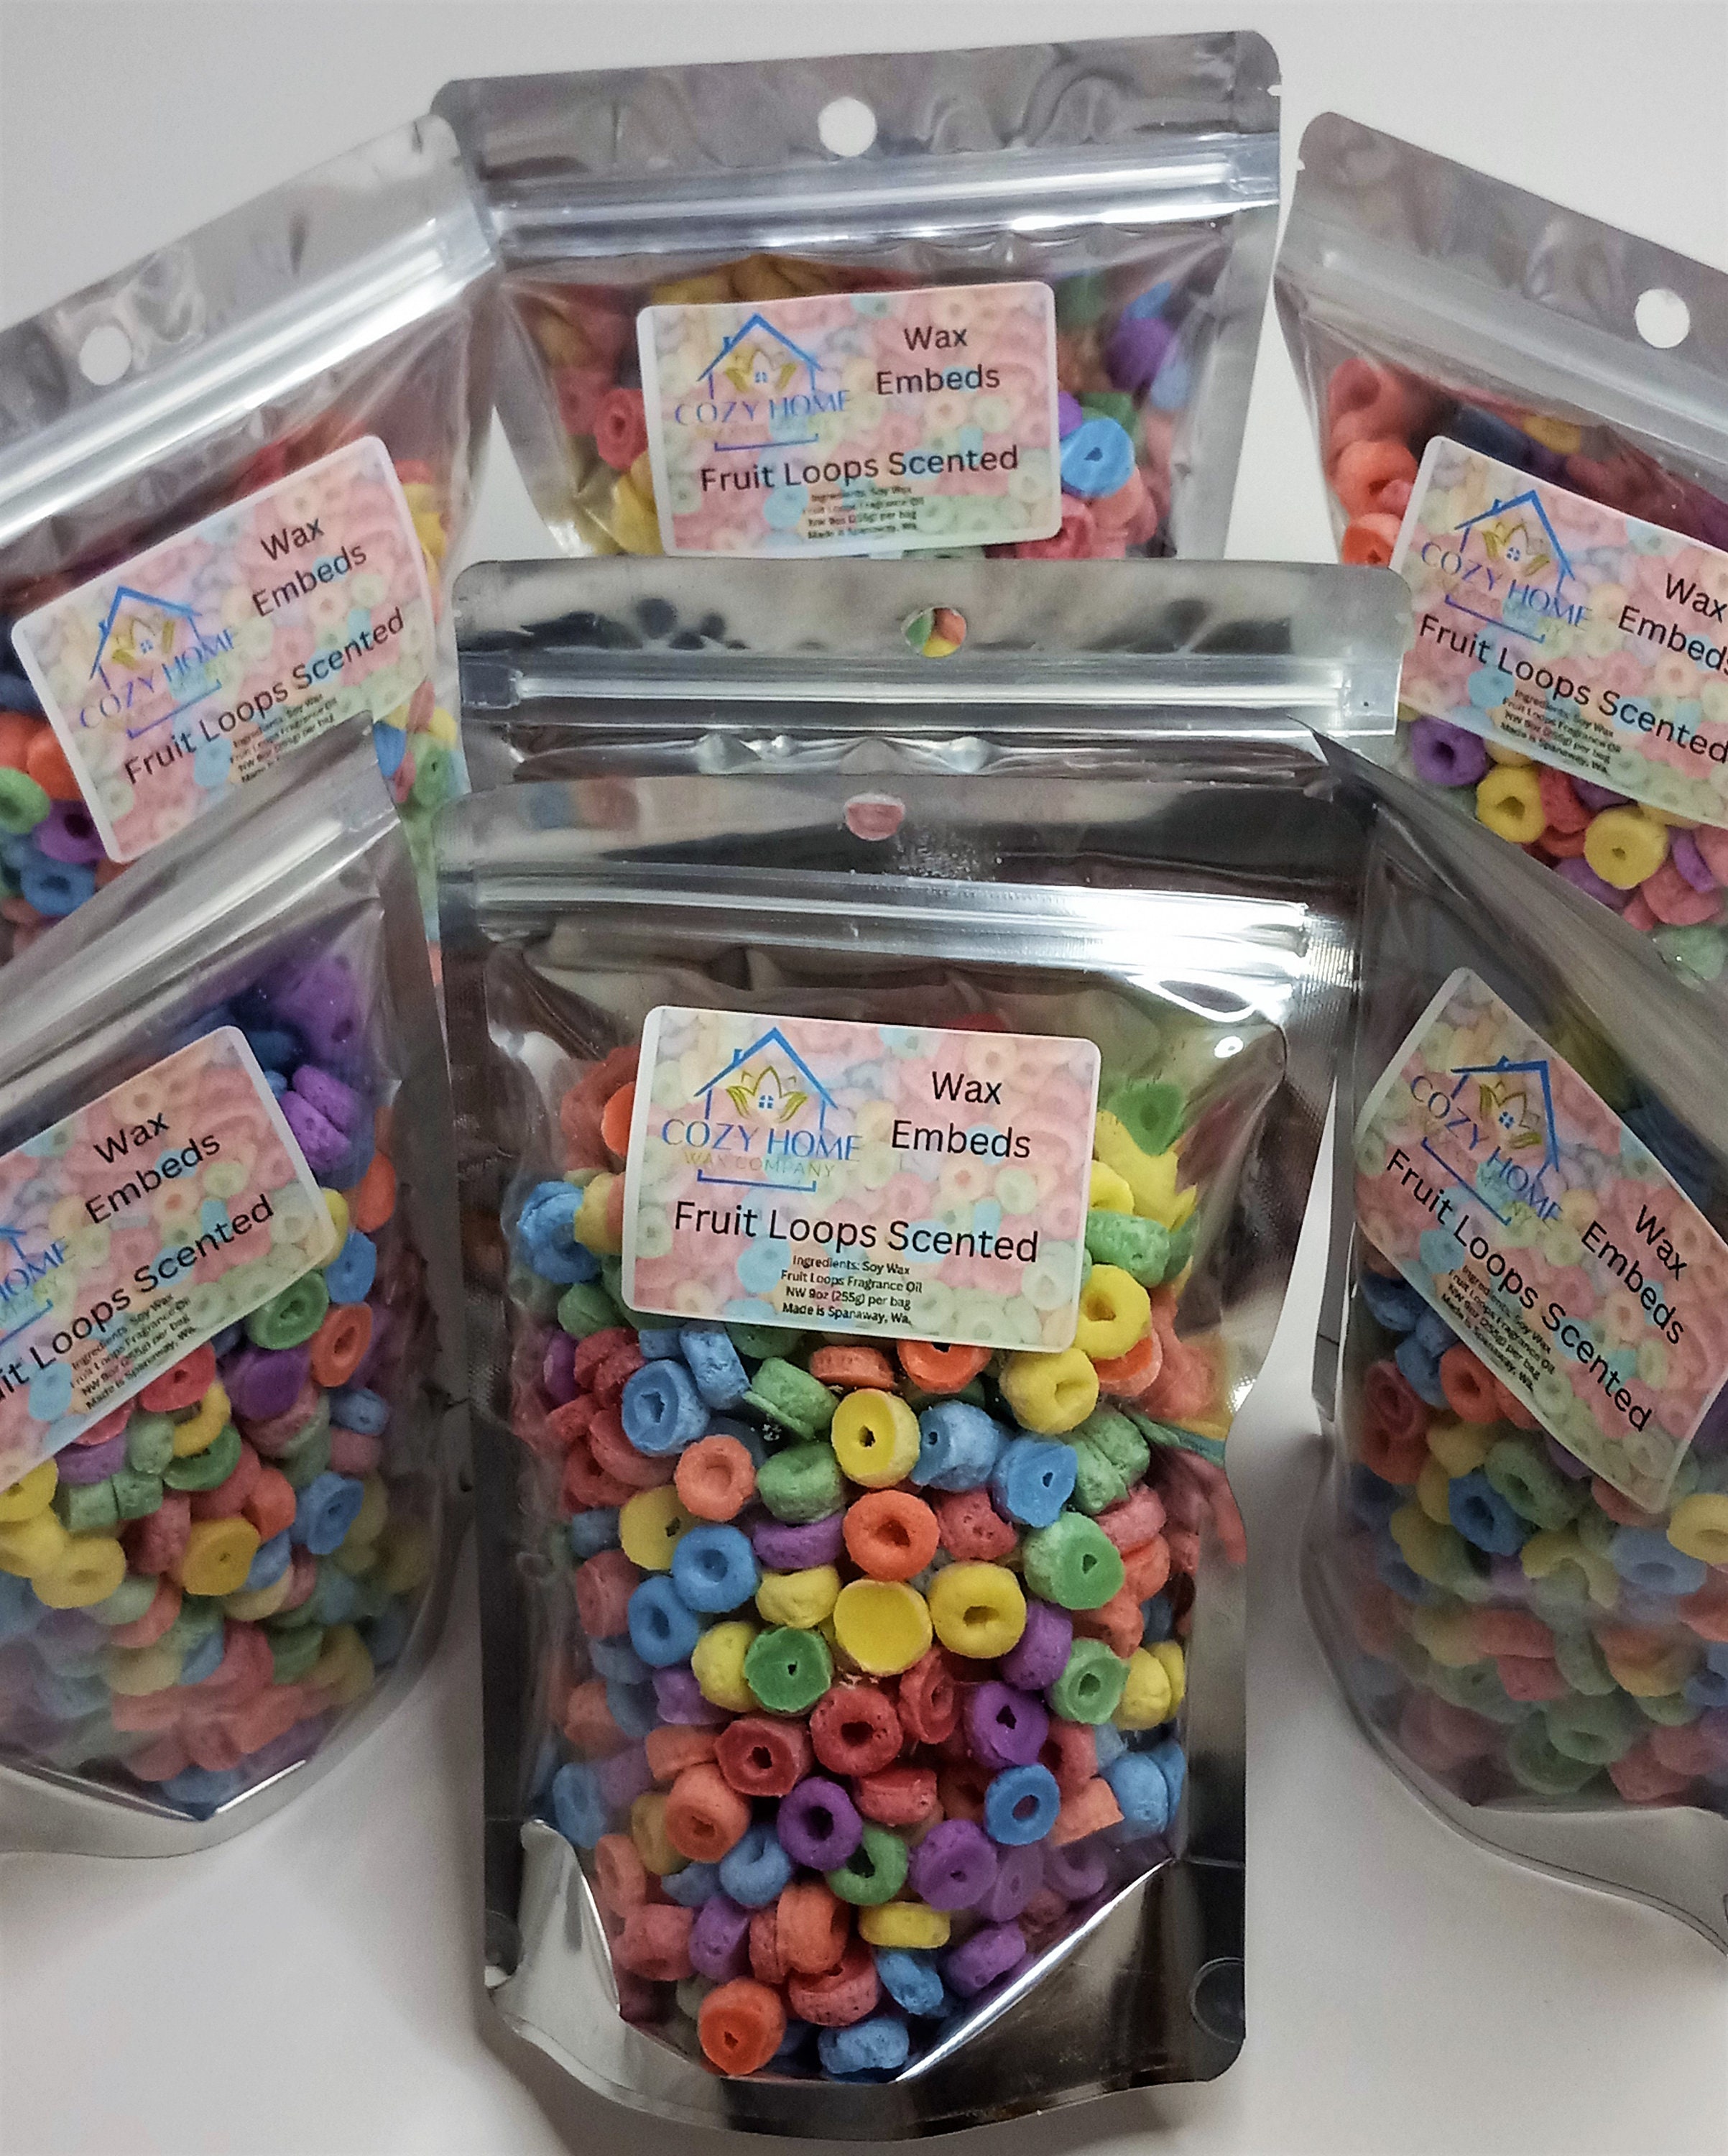 Fruit Loops Shaped and Scented Wax Embeds Pack of Wax Embeds